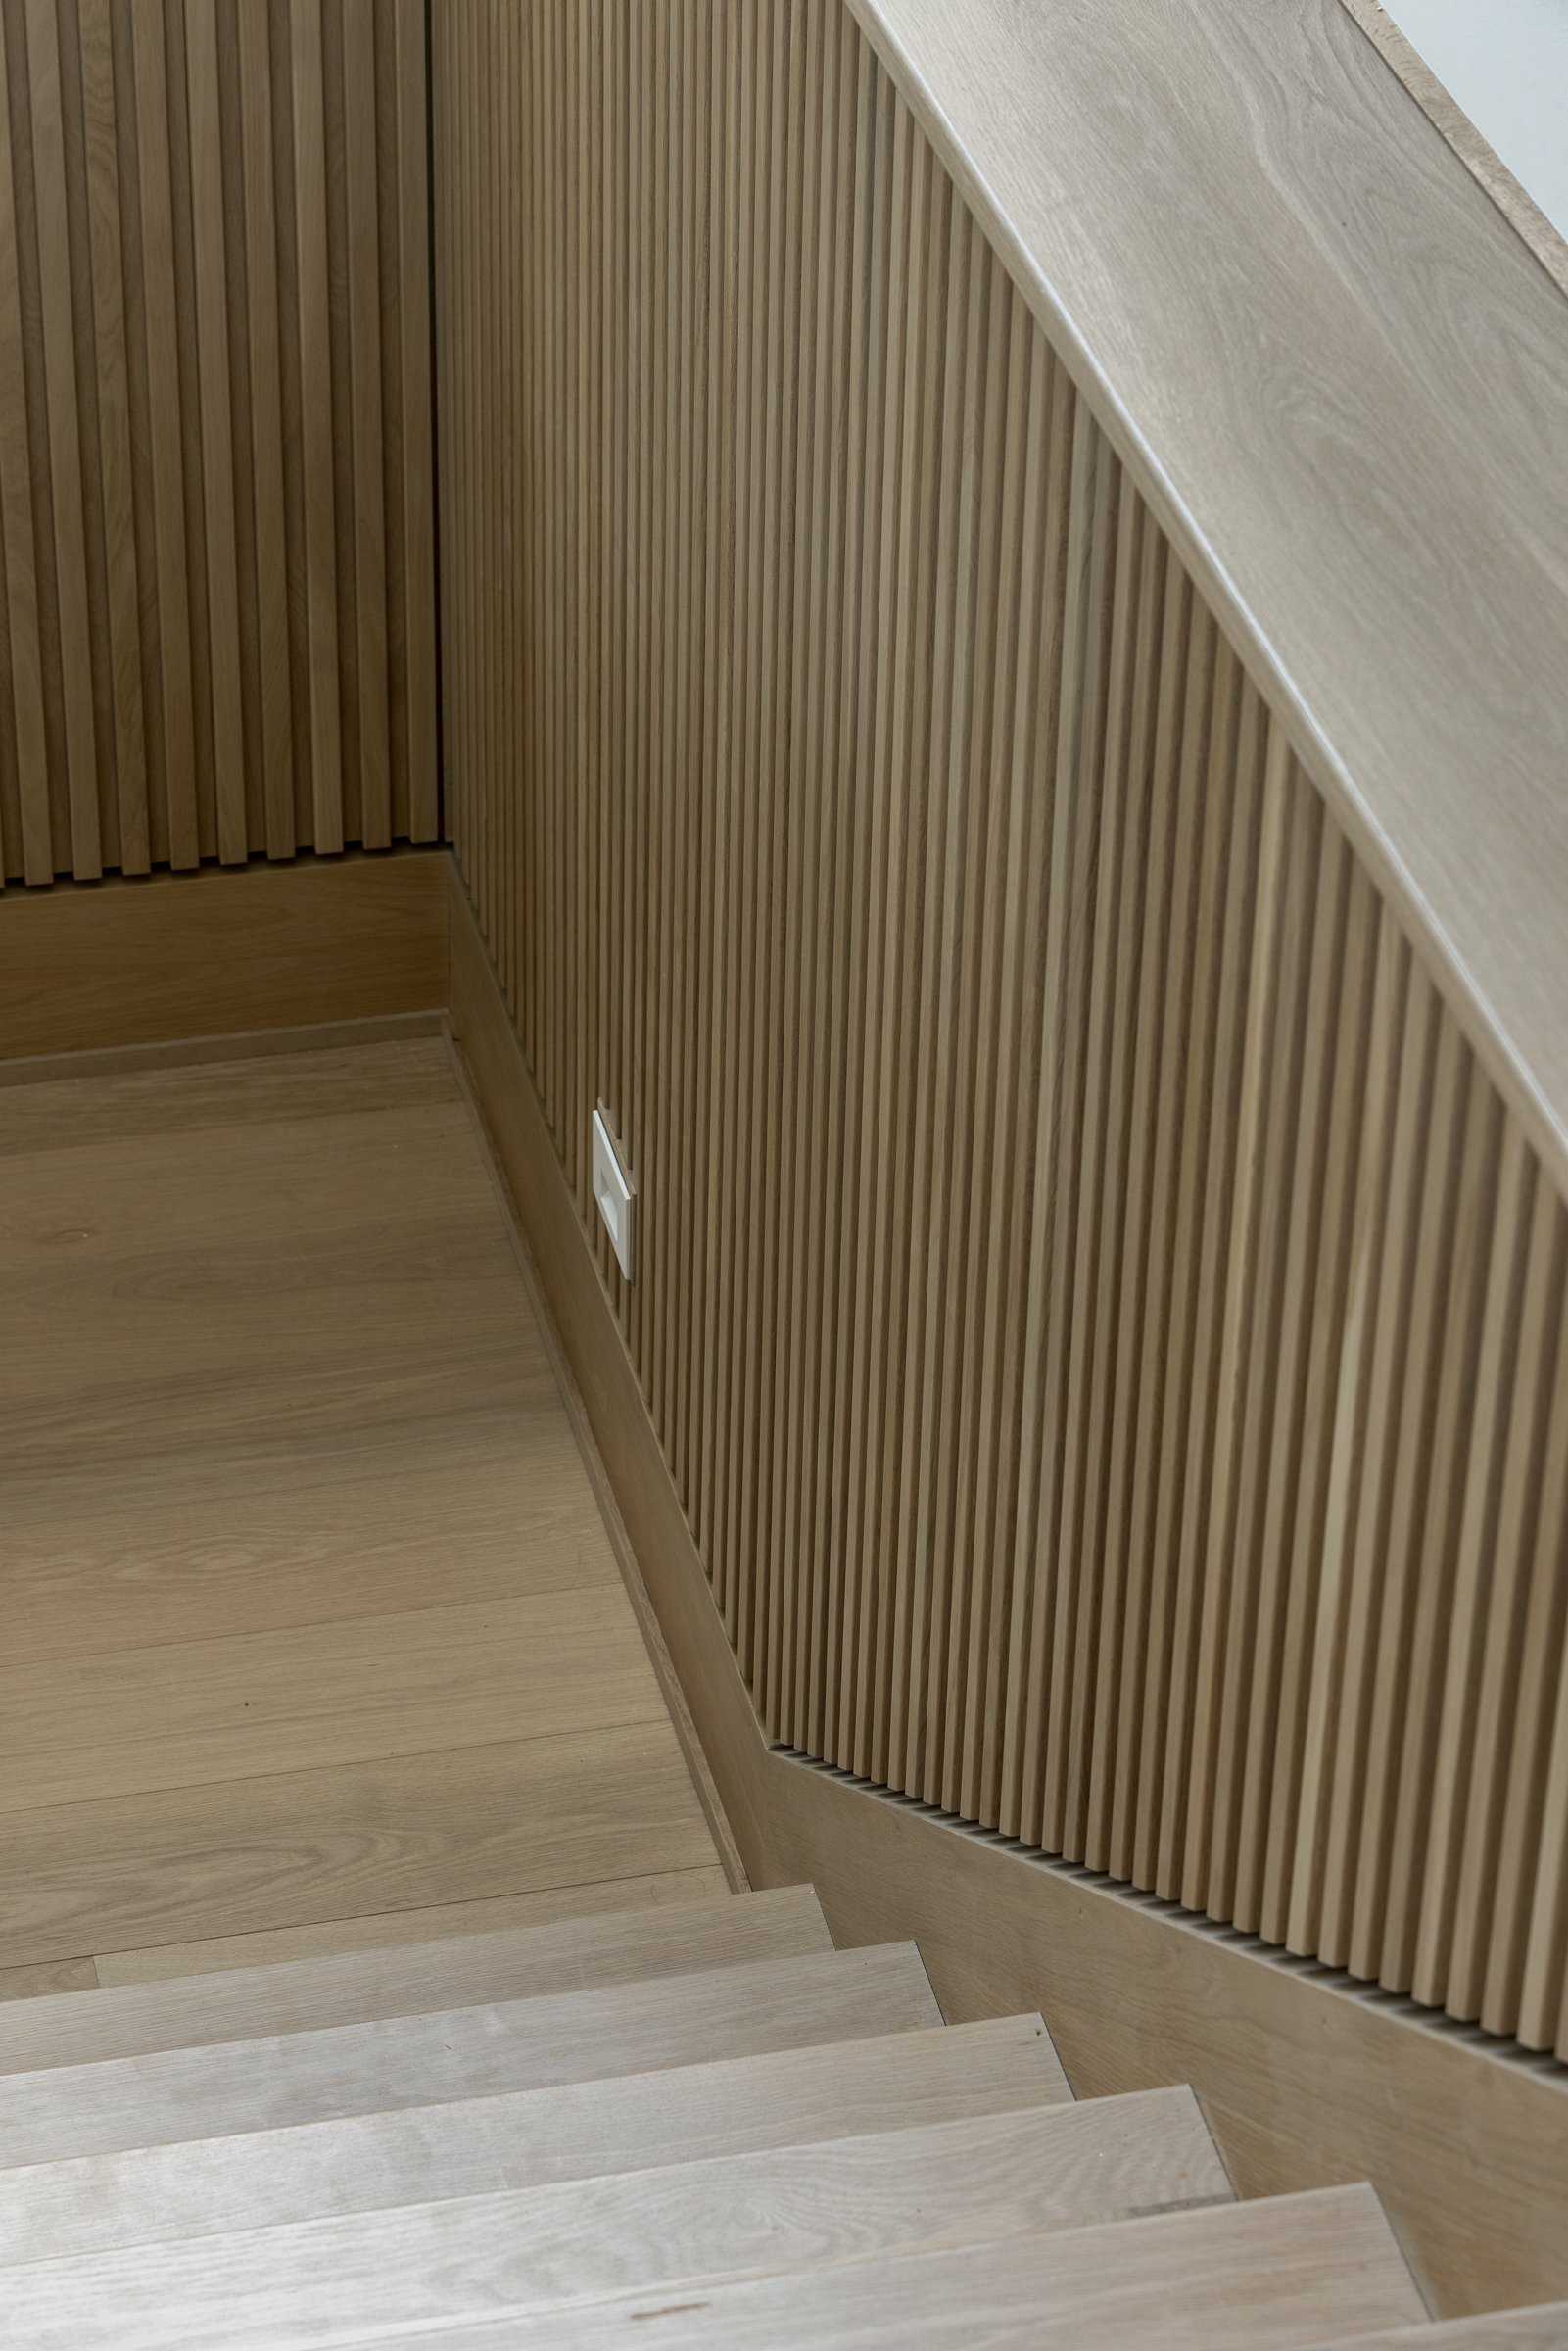 https://urbanevolutions.com/wp-content/uploads/2022/08/Classic-Slat-Wood-Wall-Panels-in-White-Oak-Installed-in-Stairwell.jpeg